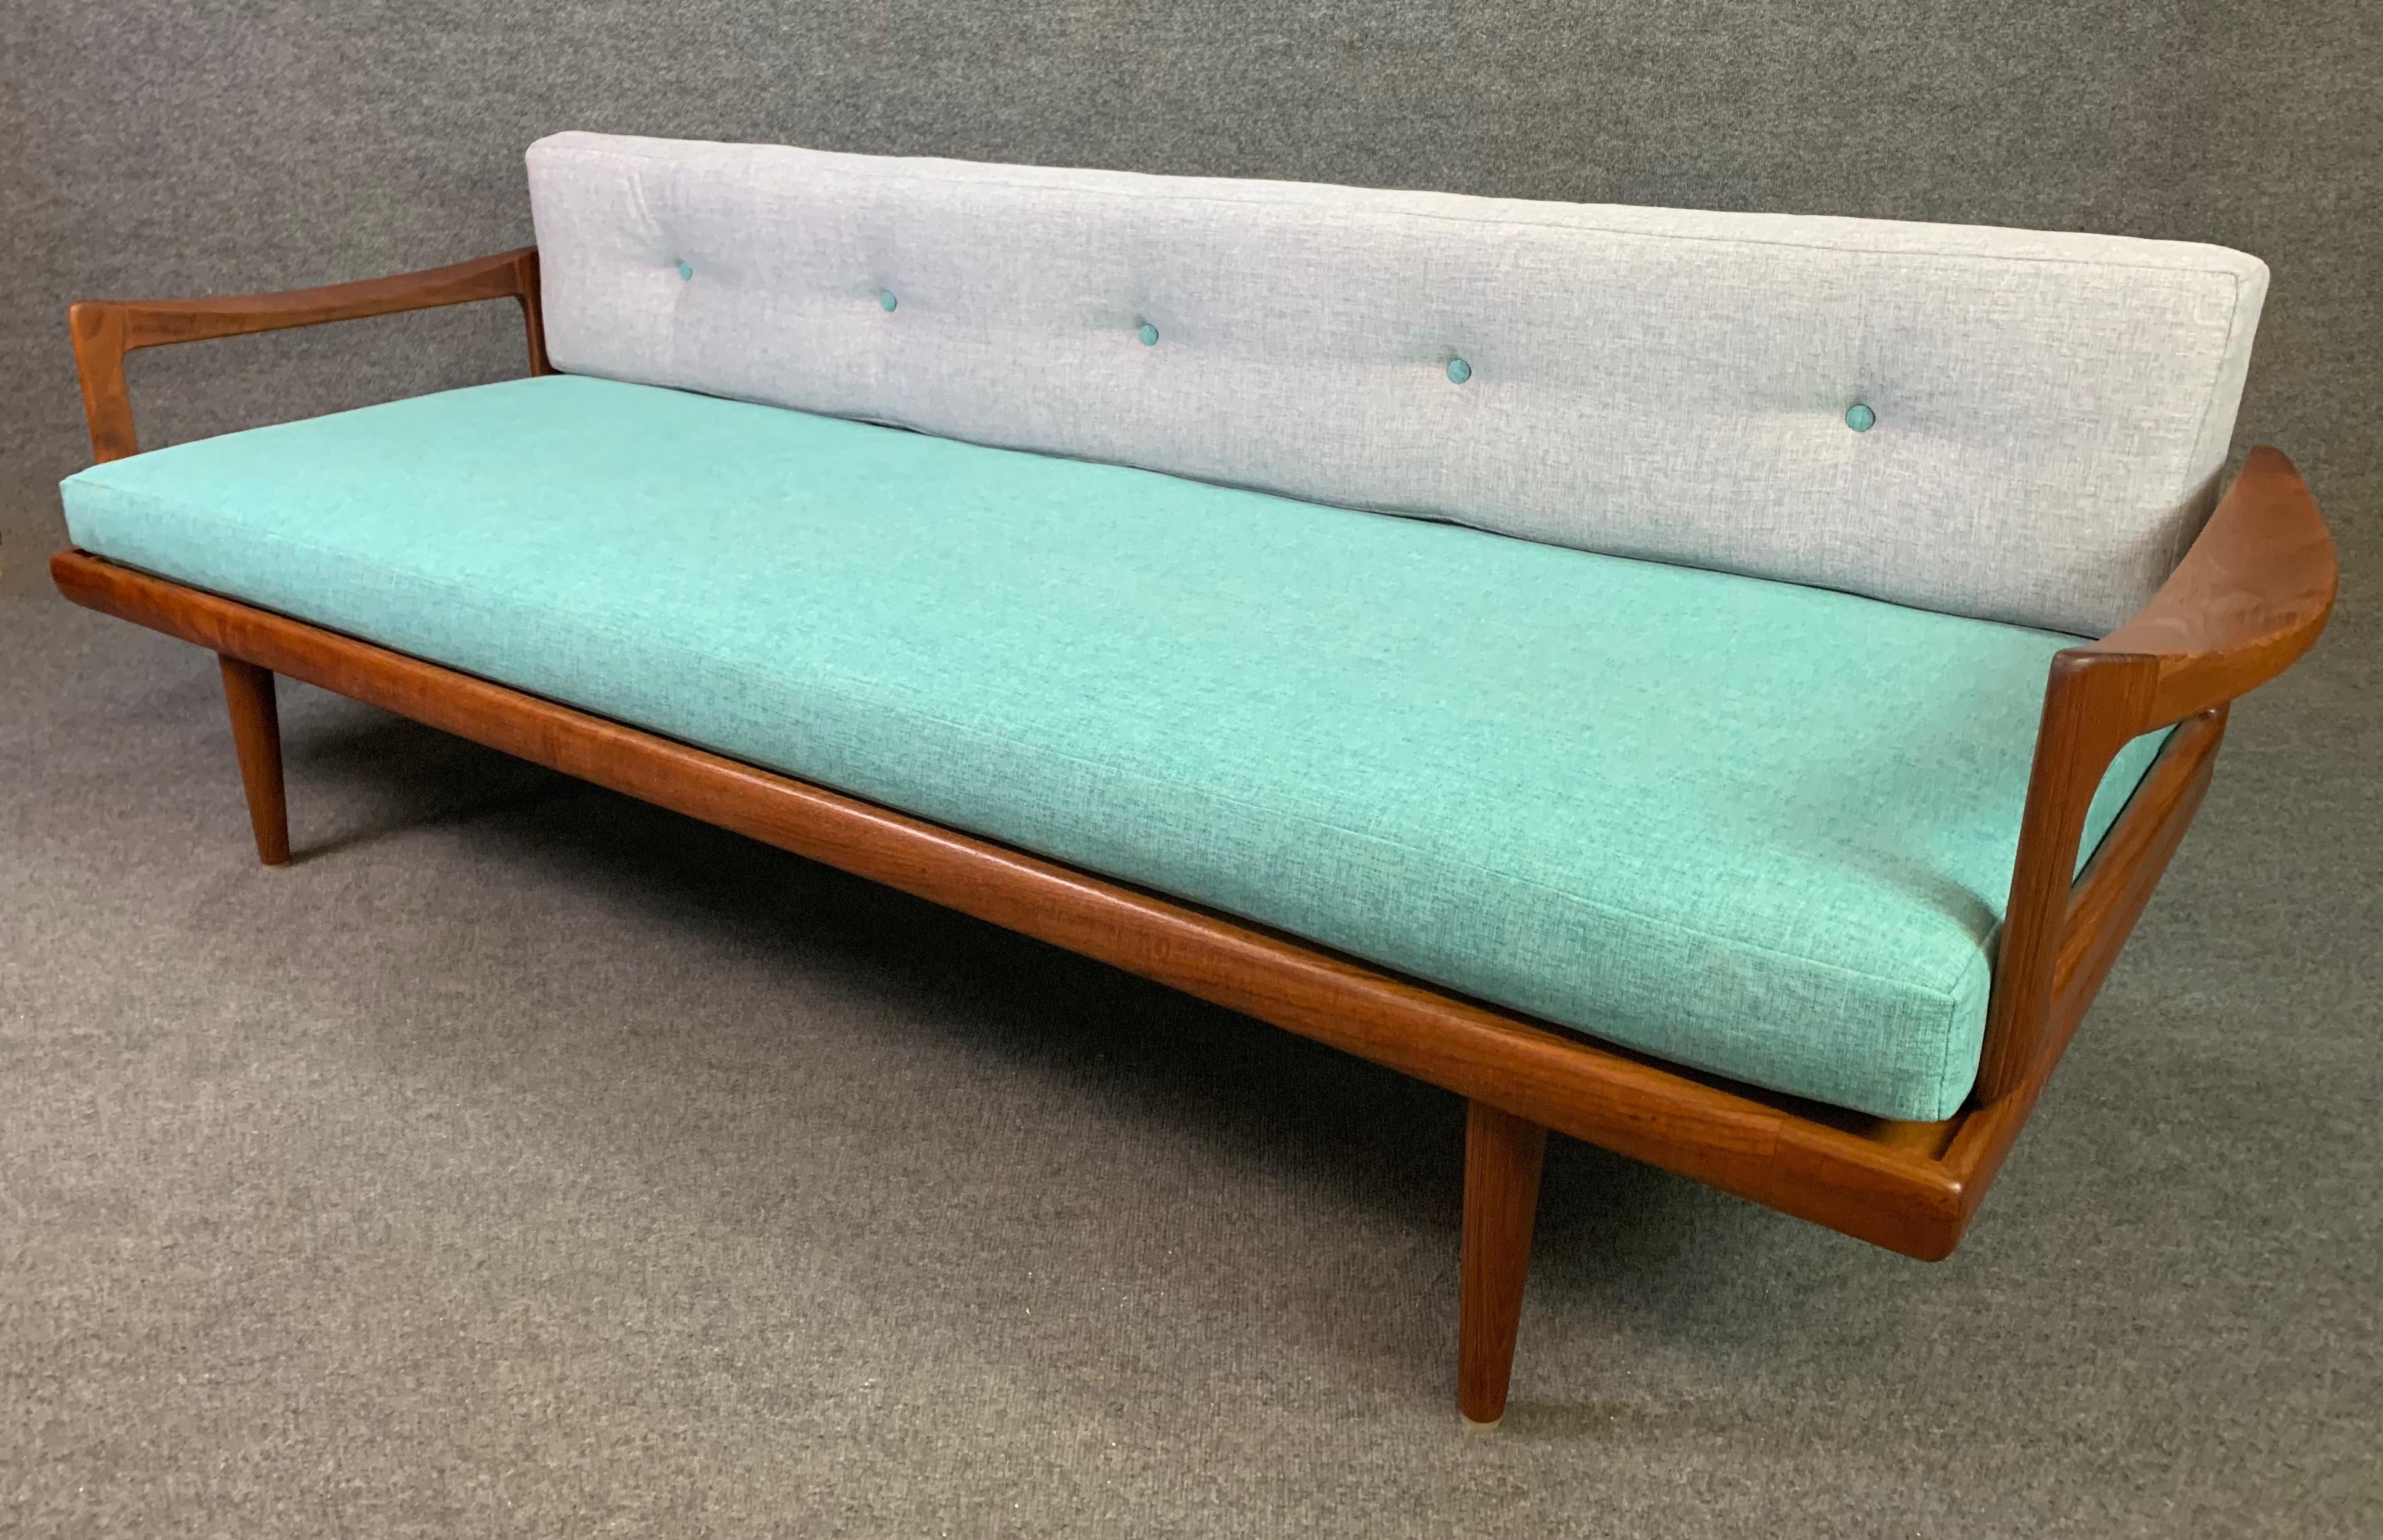 Here is an exceptional daybed sofa in solid teak designed by Edvard Kindt-Larsen and manufactured by Gustav Bahus in Norway in the 1960s.
This rare and comfortable piece, recently imported from Denmark to California before its complete restoration,